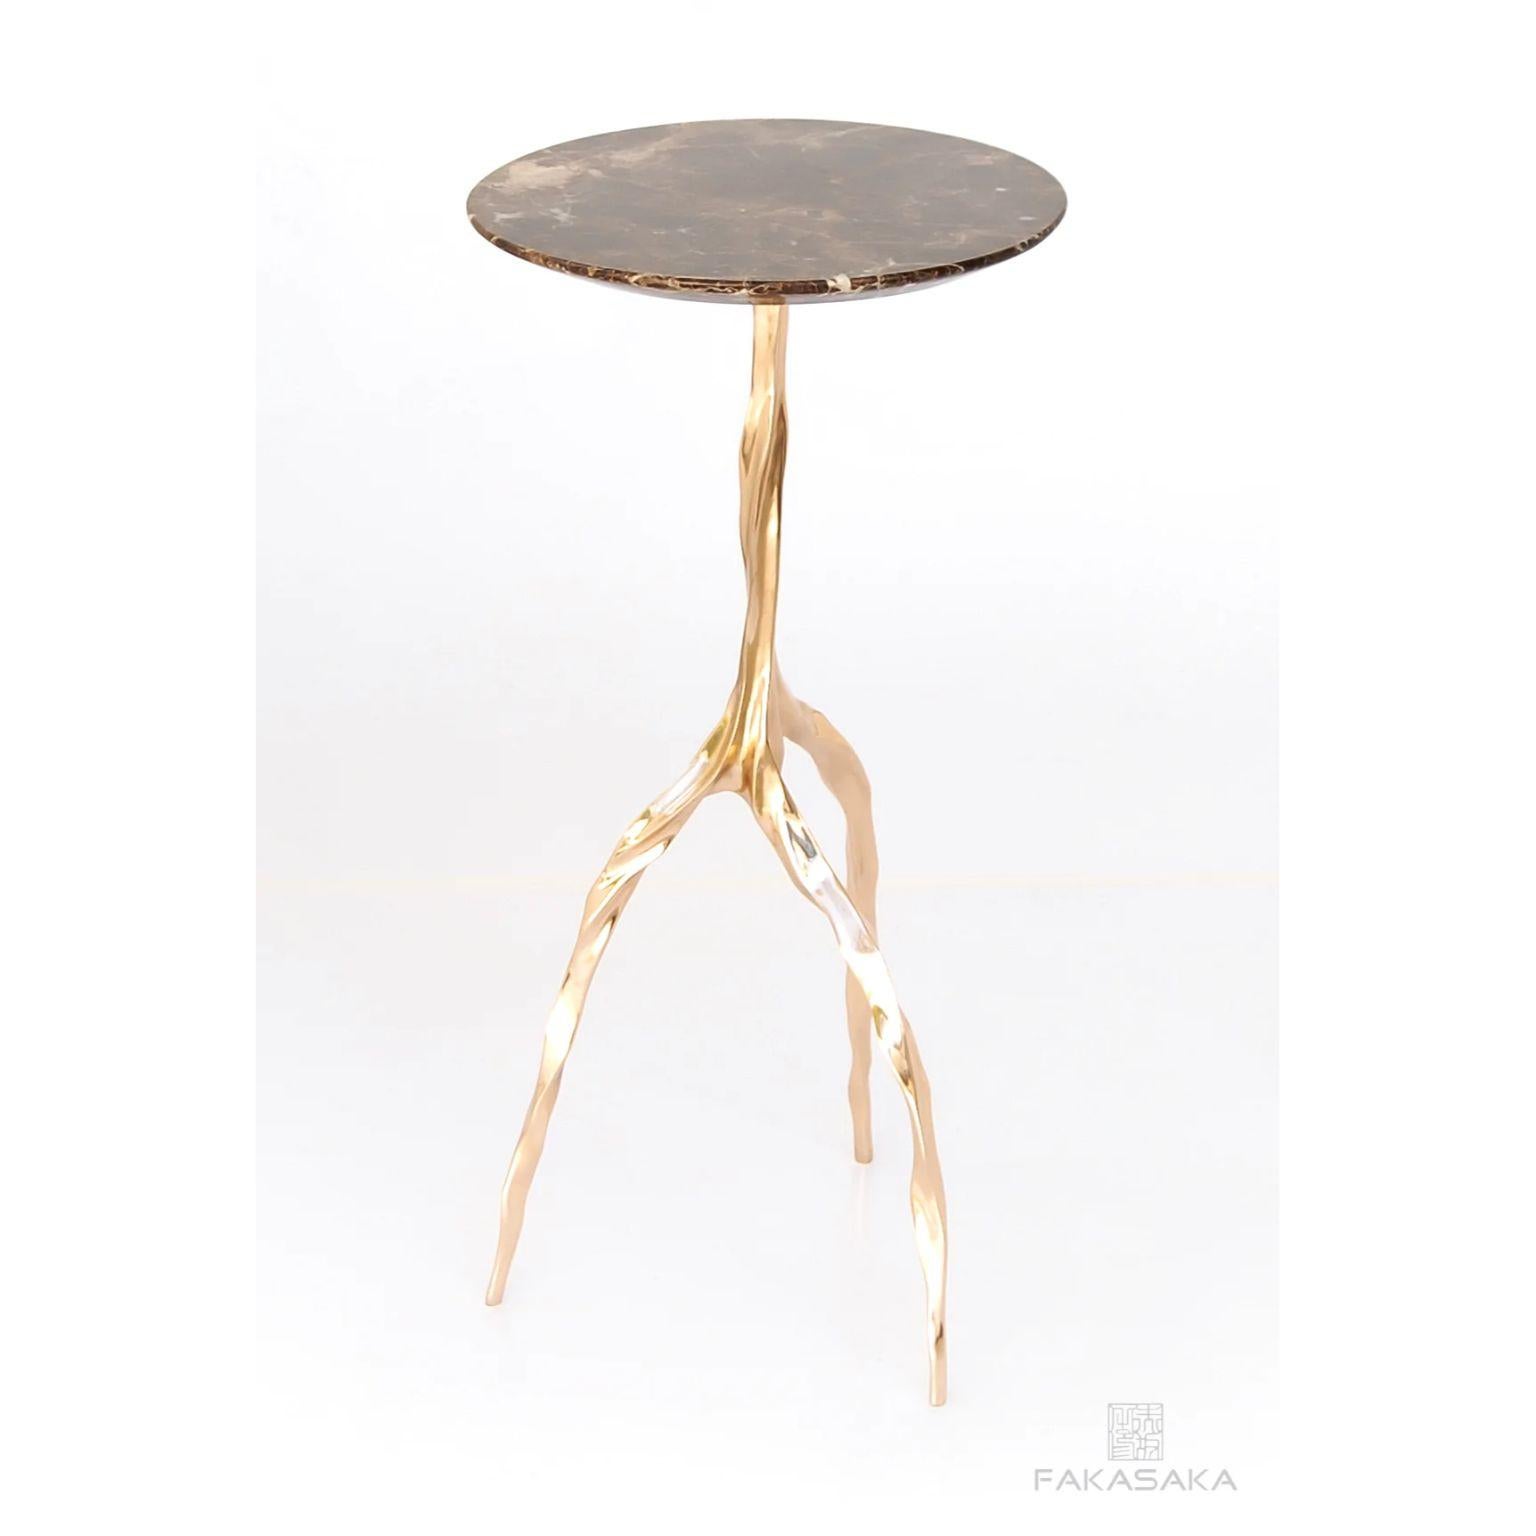 Other Nina Drink Table with Marrom Imperial Marble Top by Fakasaka Design For Sale